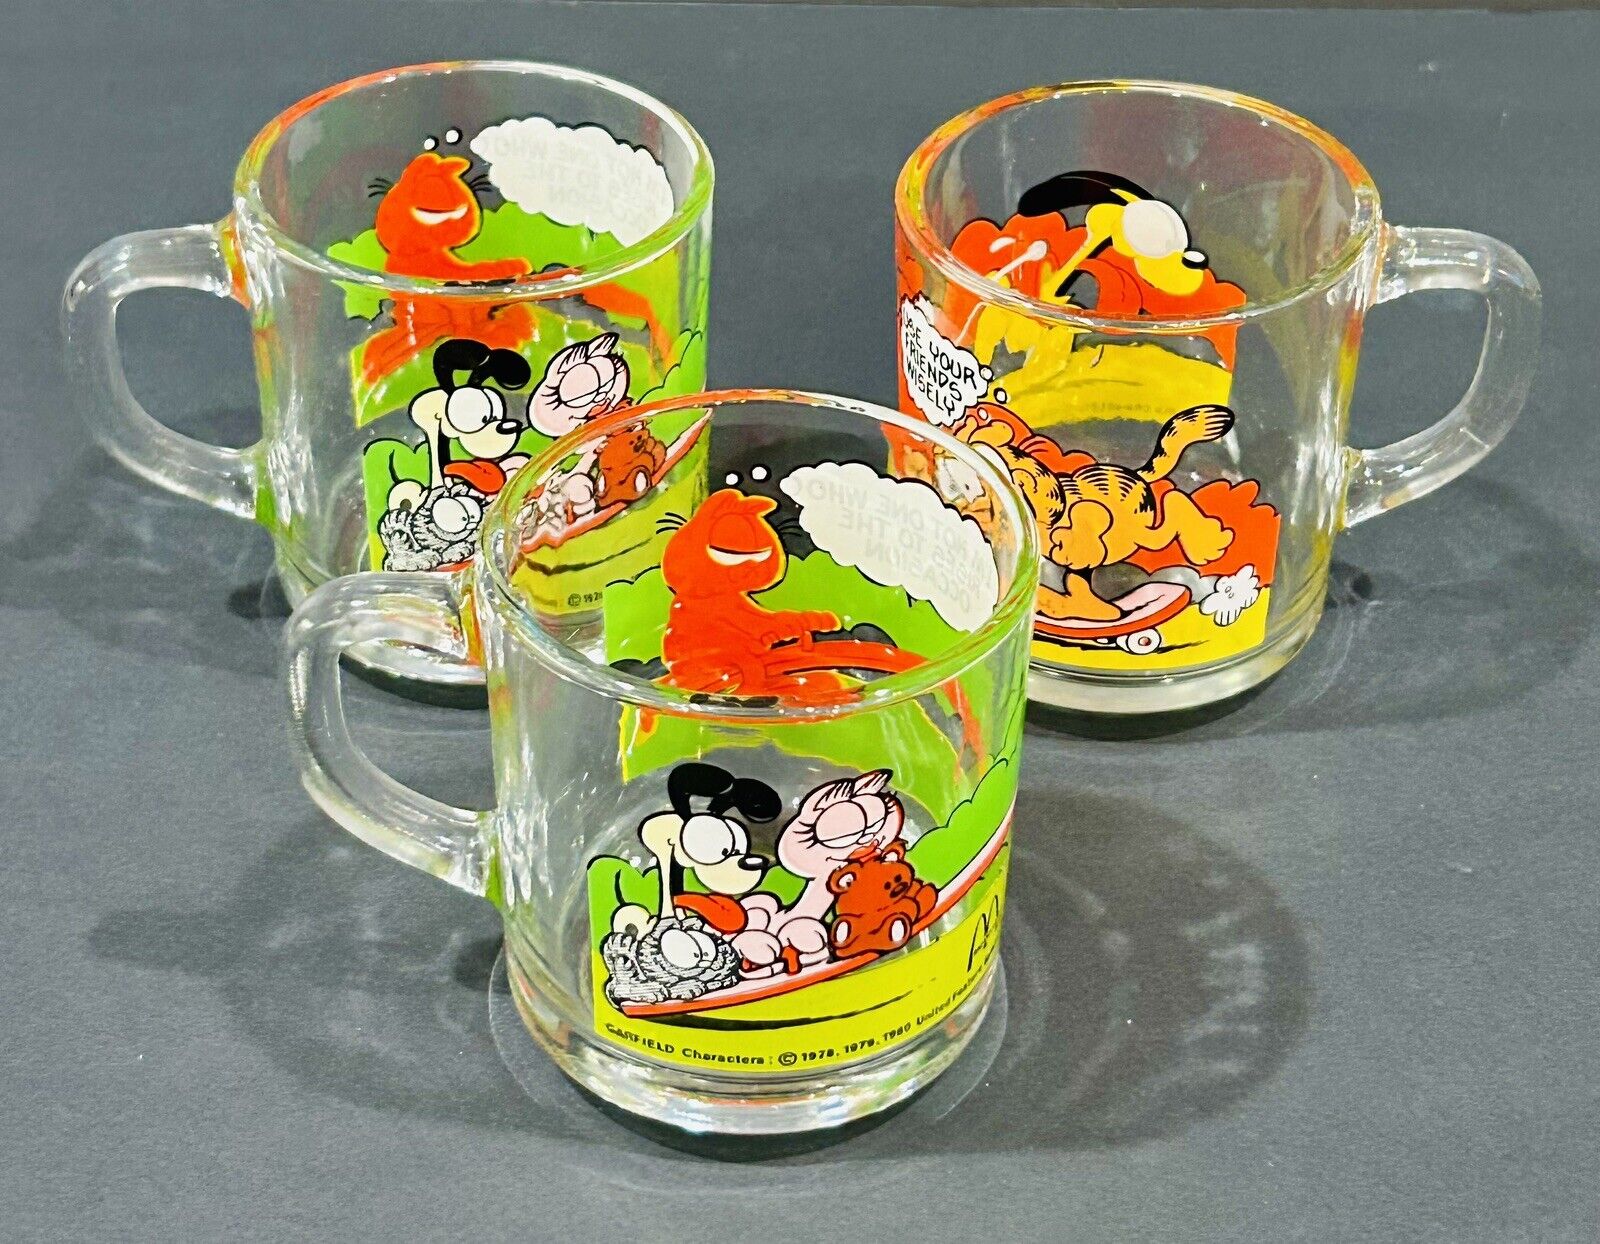 Lot of 3 1978 Vintage McDonald\'s Garfield Mugs Clear Glass Anchor Hocking